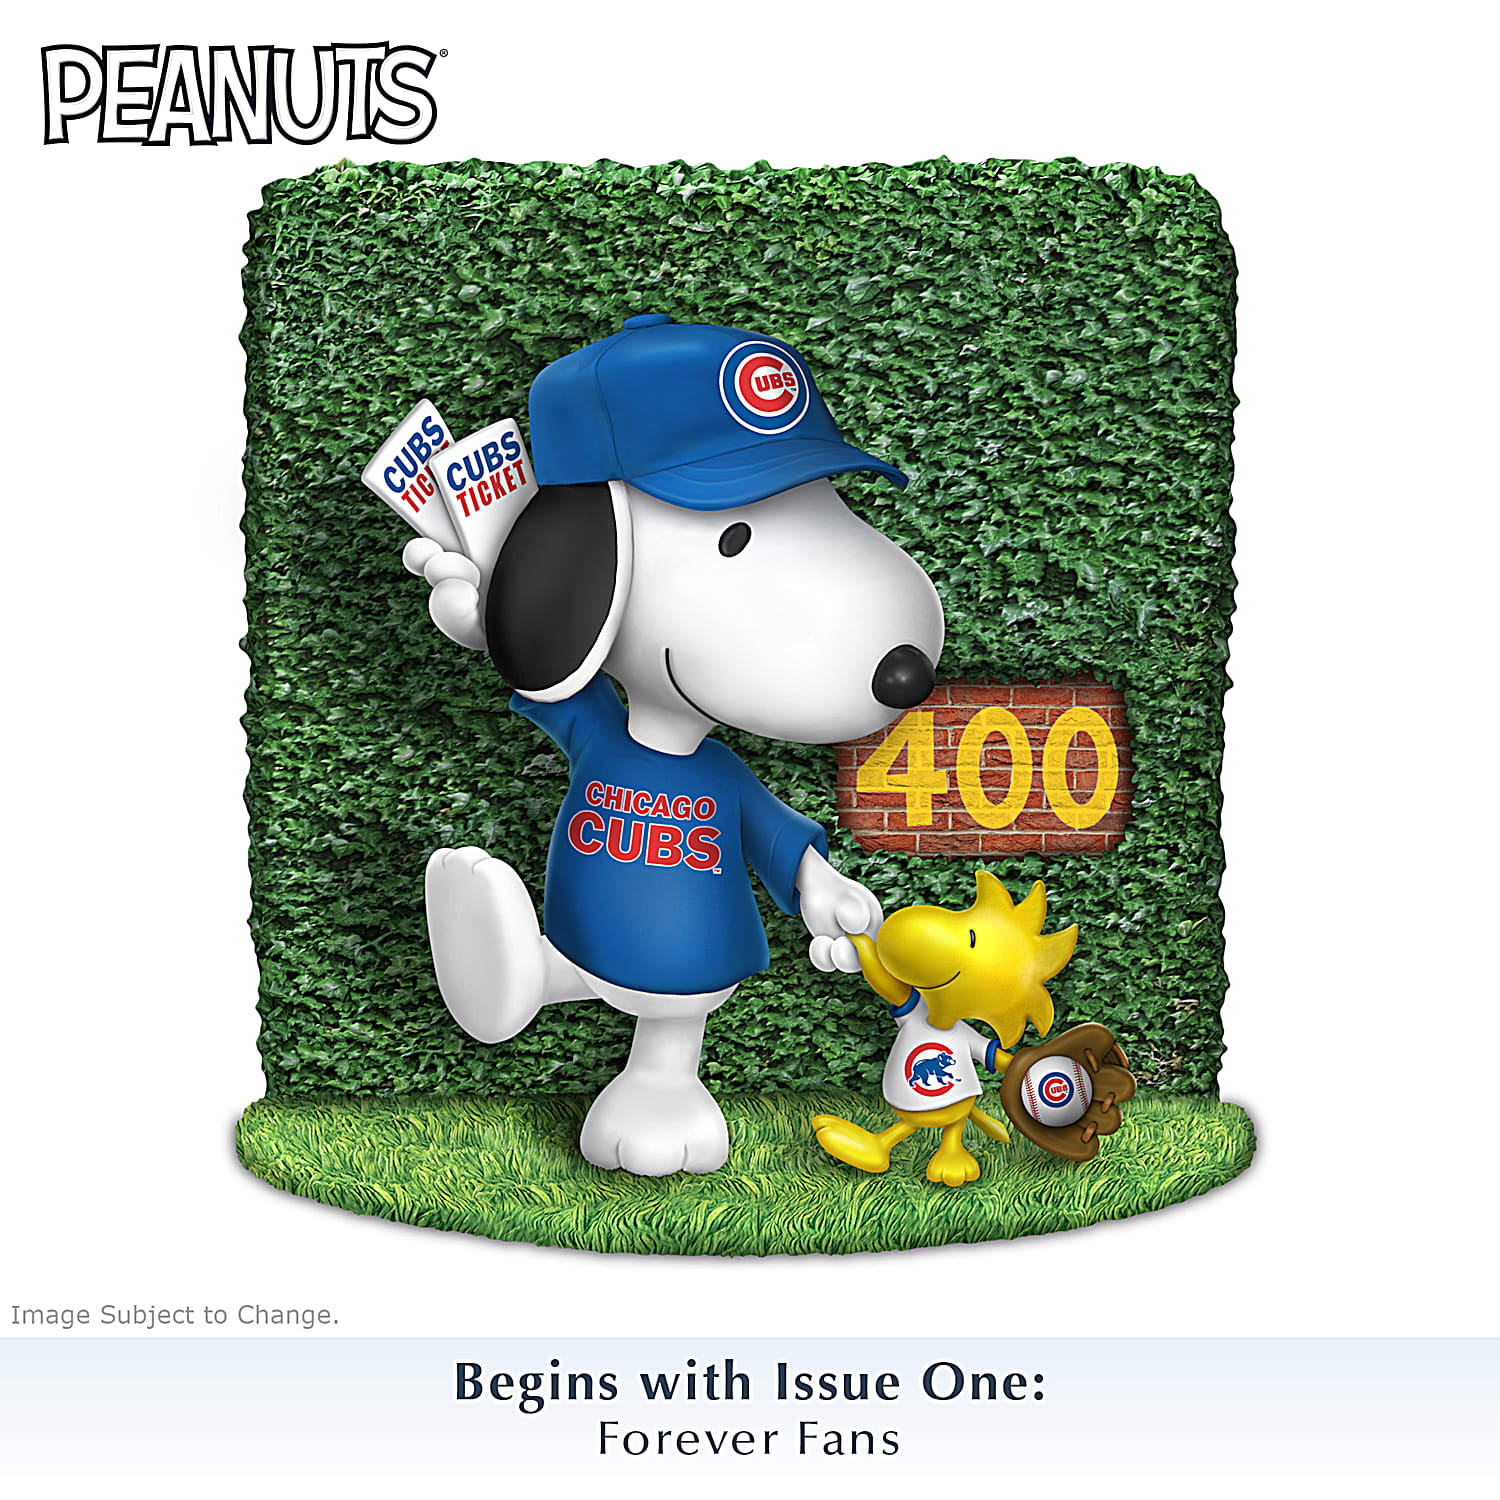 PEANUTS Snoopy Chicago Cubs Fan-itude Hand-Painted MLB Figurine Collection